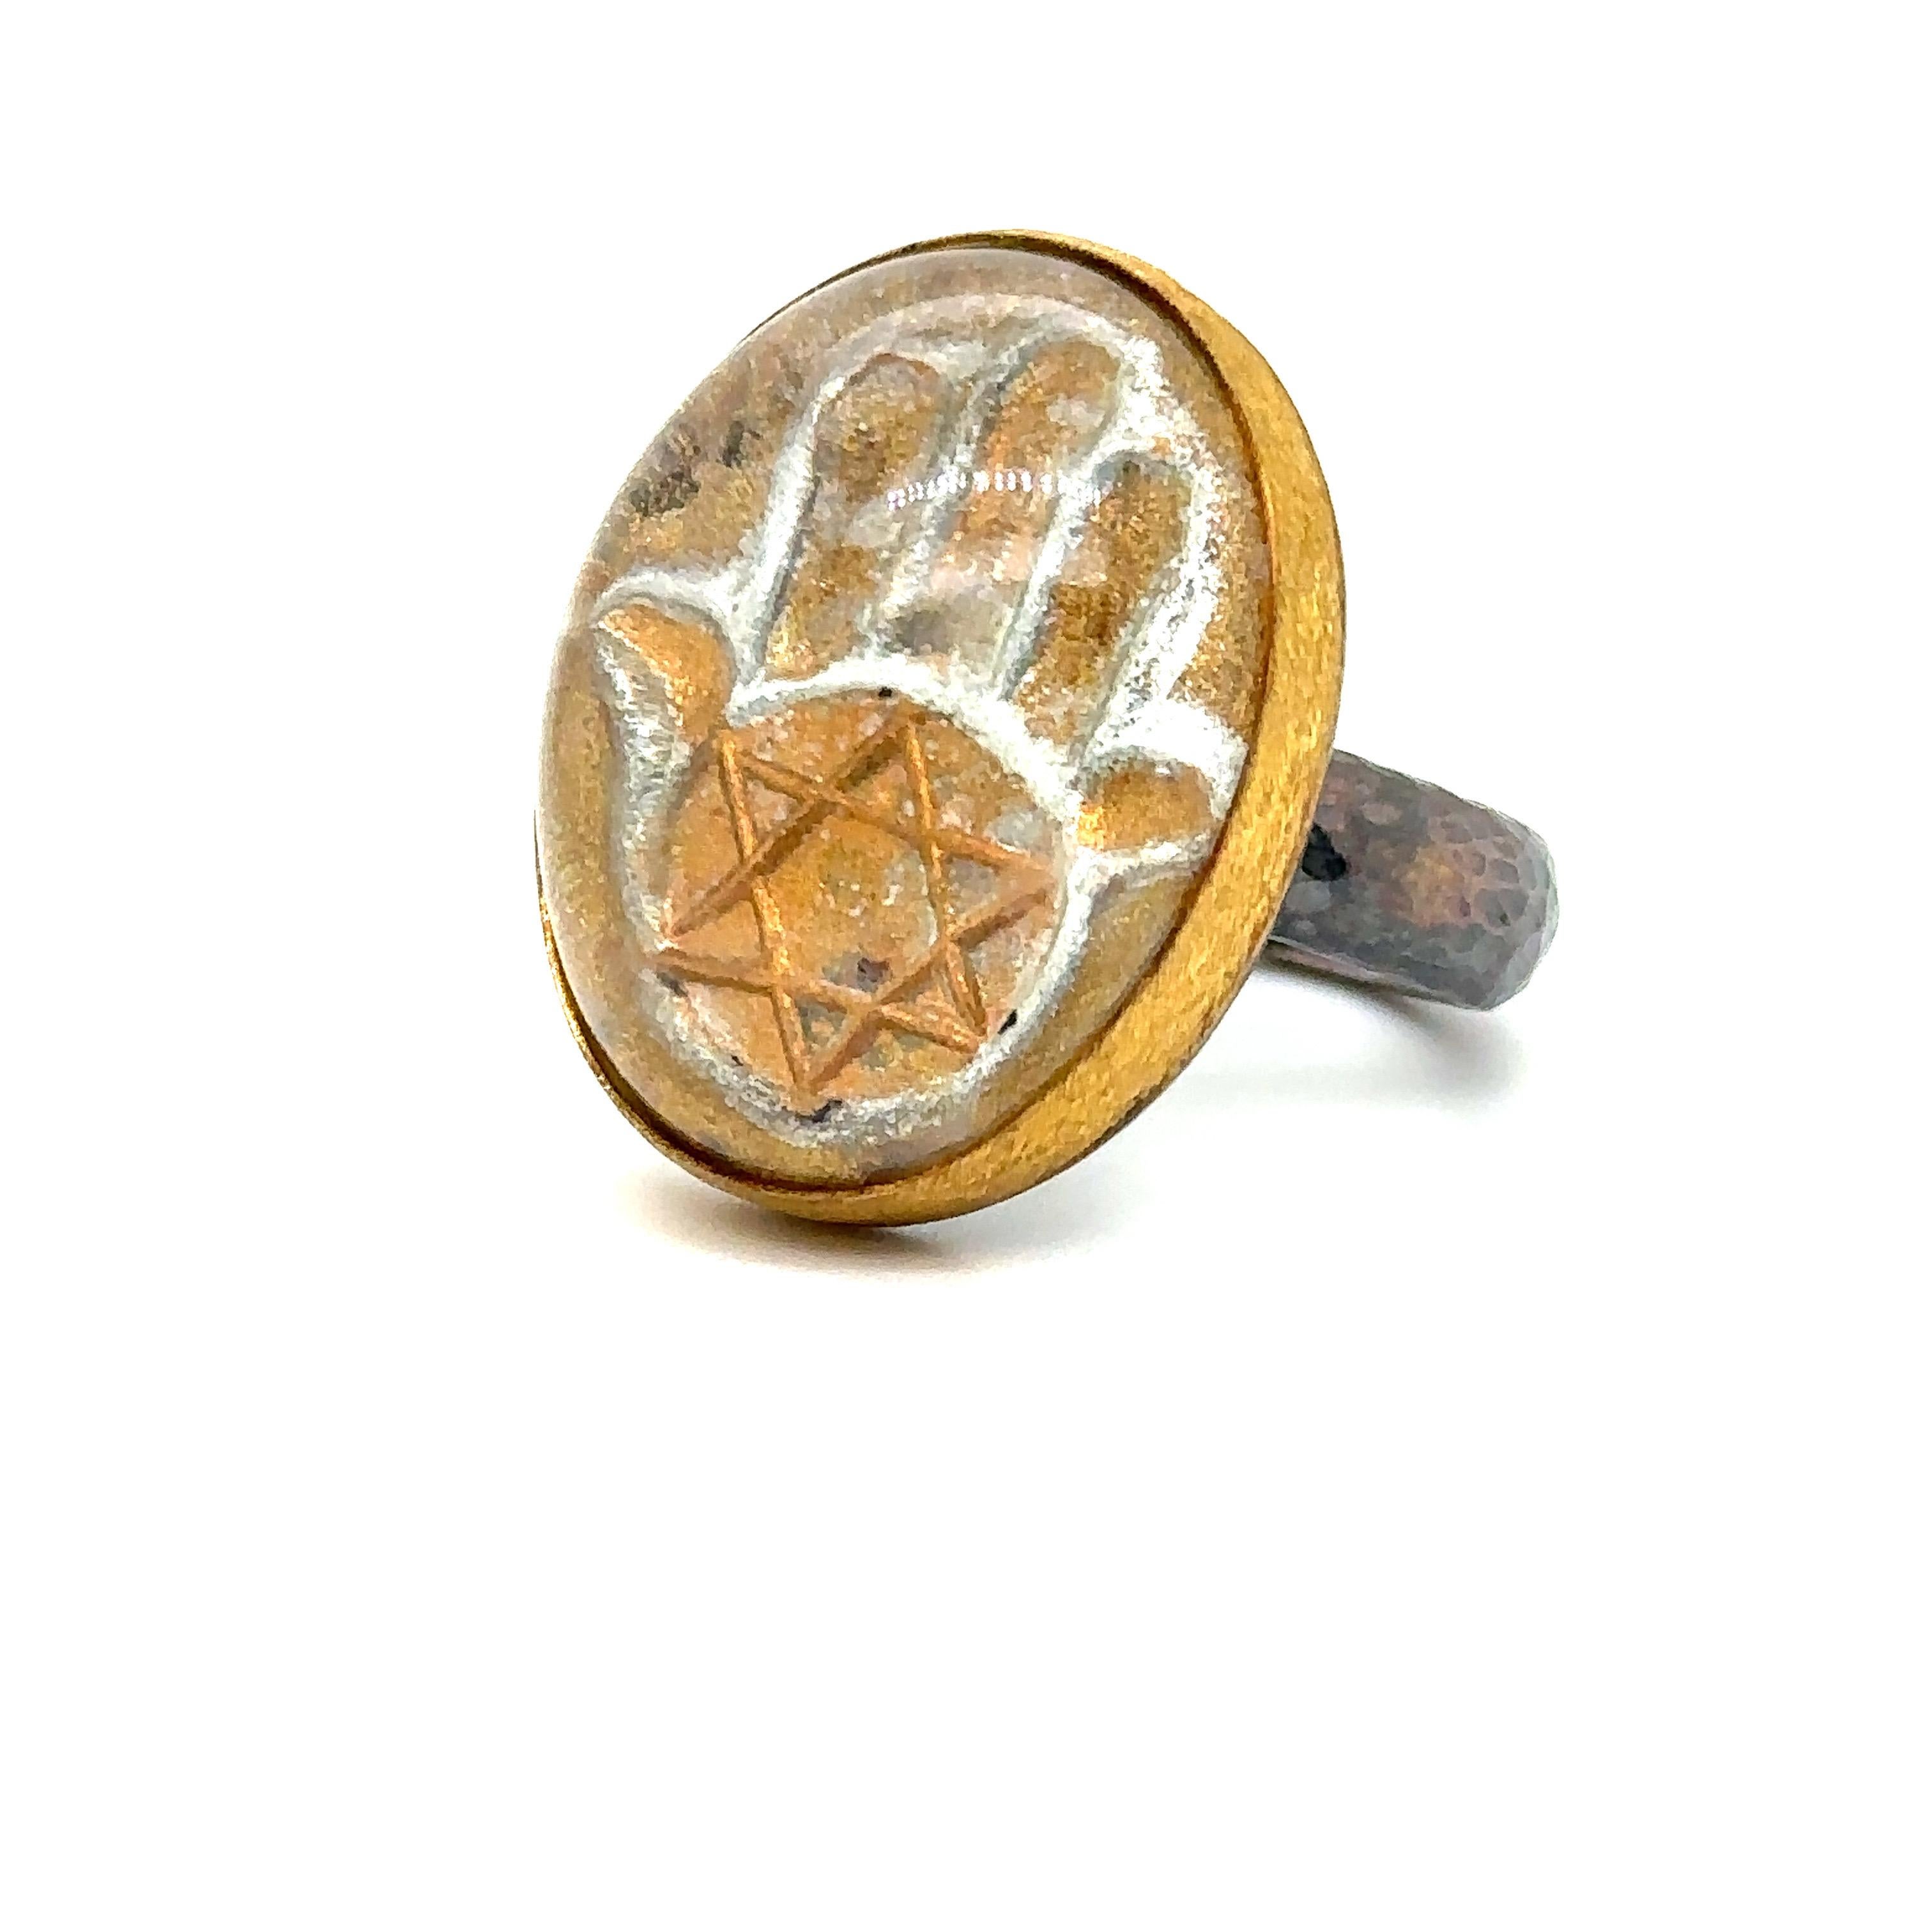 JAS-19-1818 - 24K GOLD/STERLING SILVER HAMSA RING with 30.00CT CARVED QUARTZ  In New Condition For Sale In New York, NY